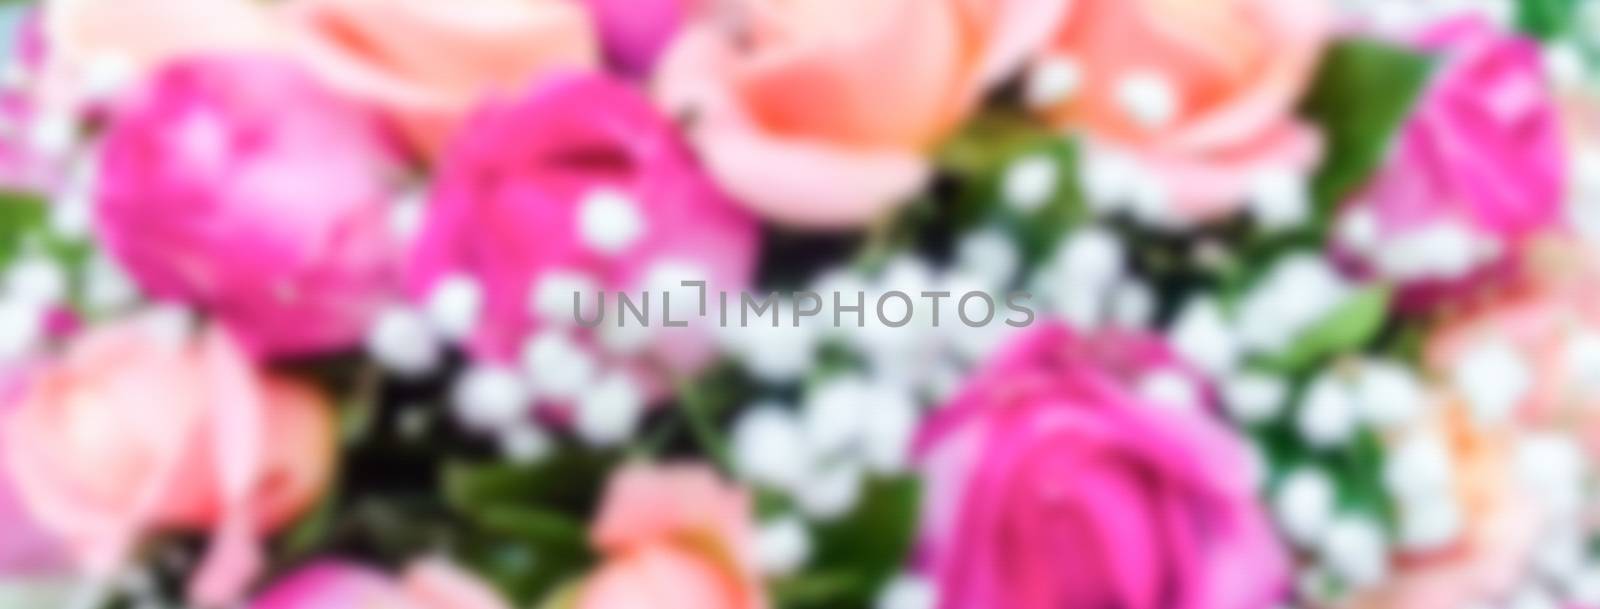 Defocused background with bouquet of roses by marcorubino